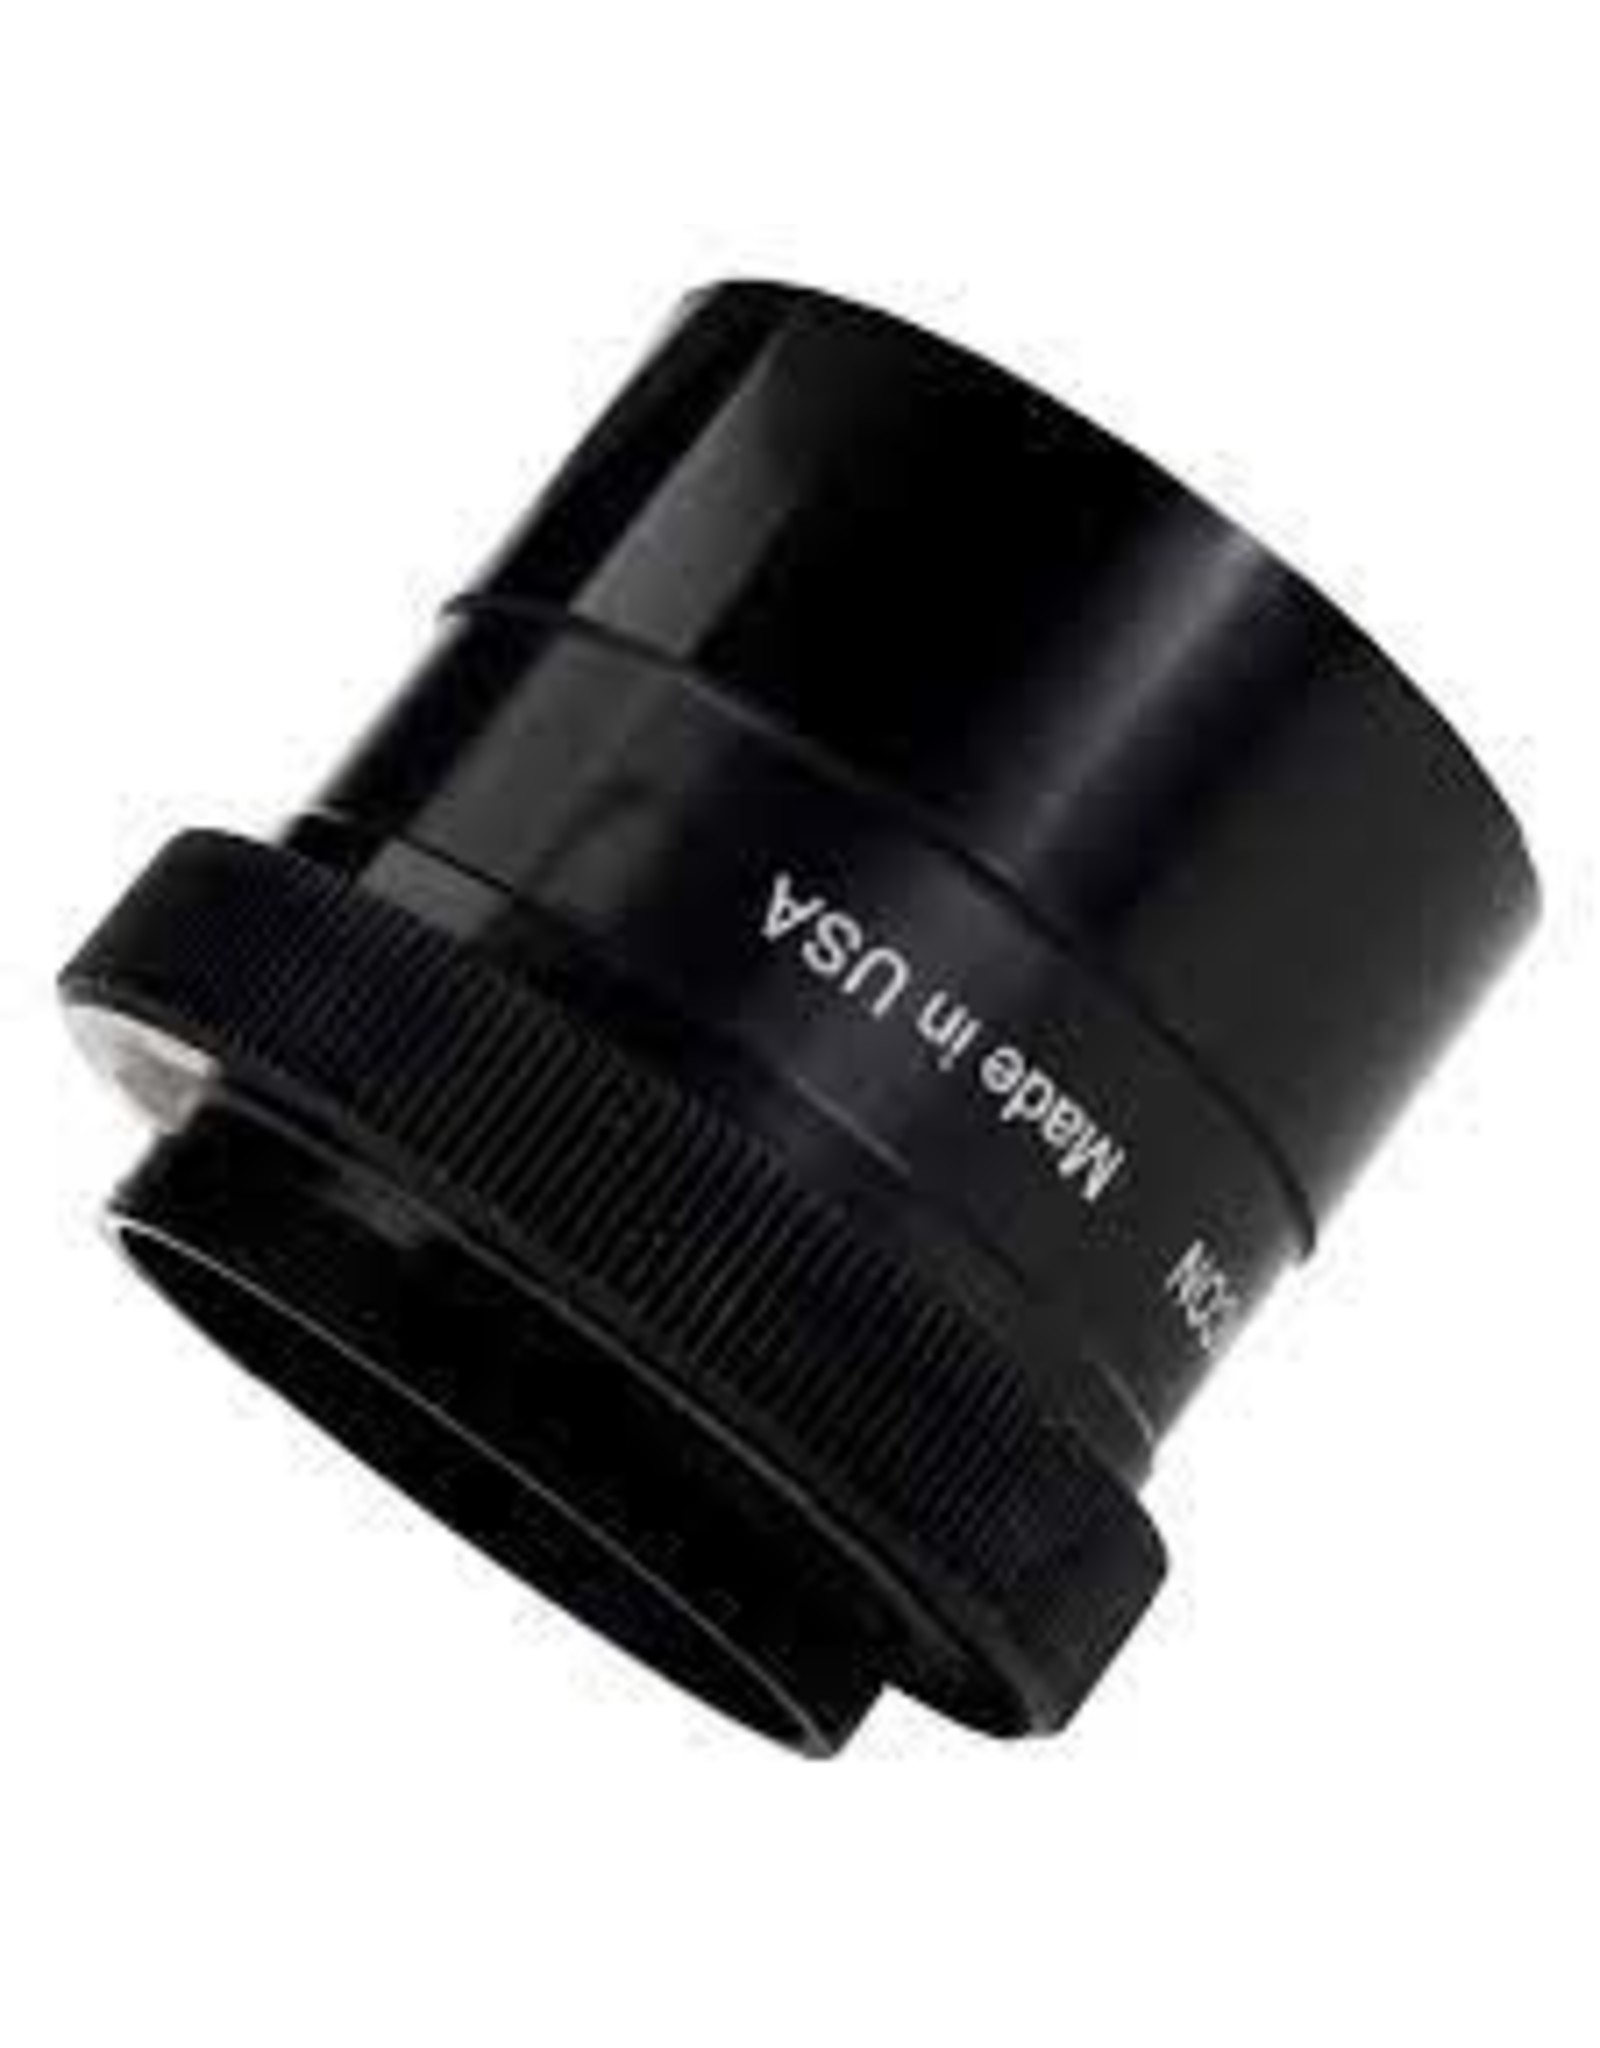 Lumicon 2" Prime Focus Direct Camera Adapter with Canon EF Mount